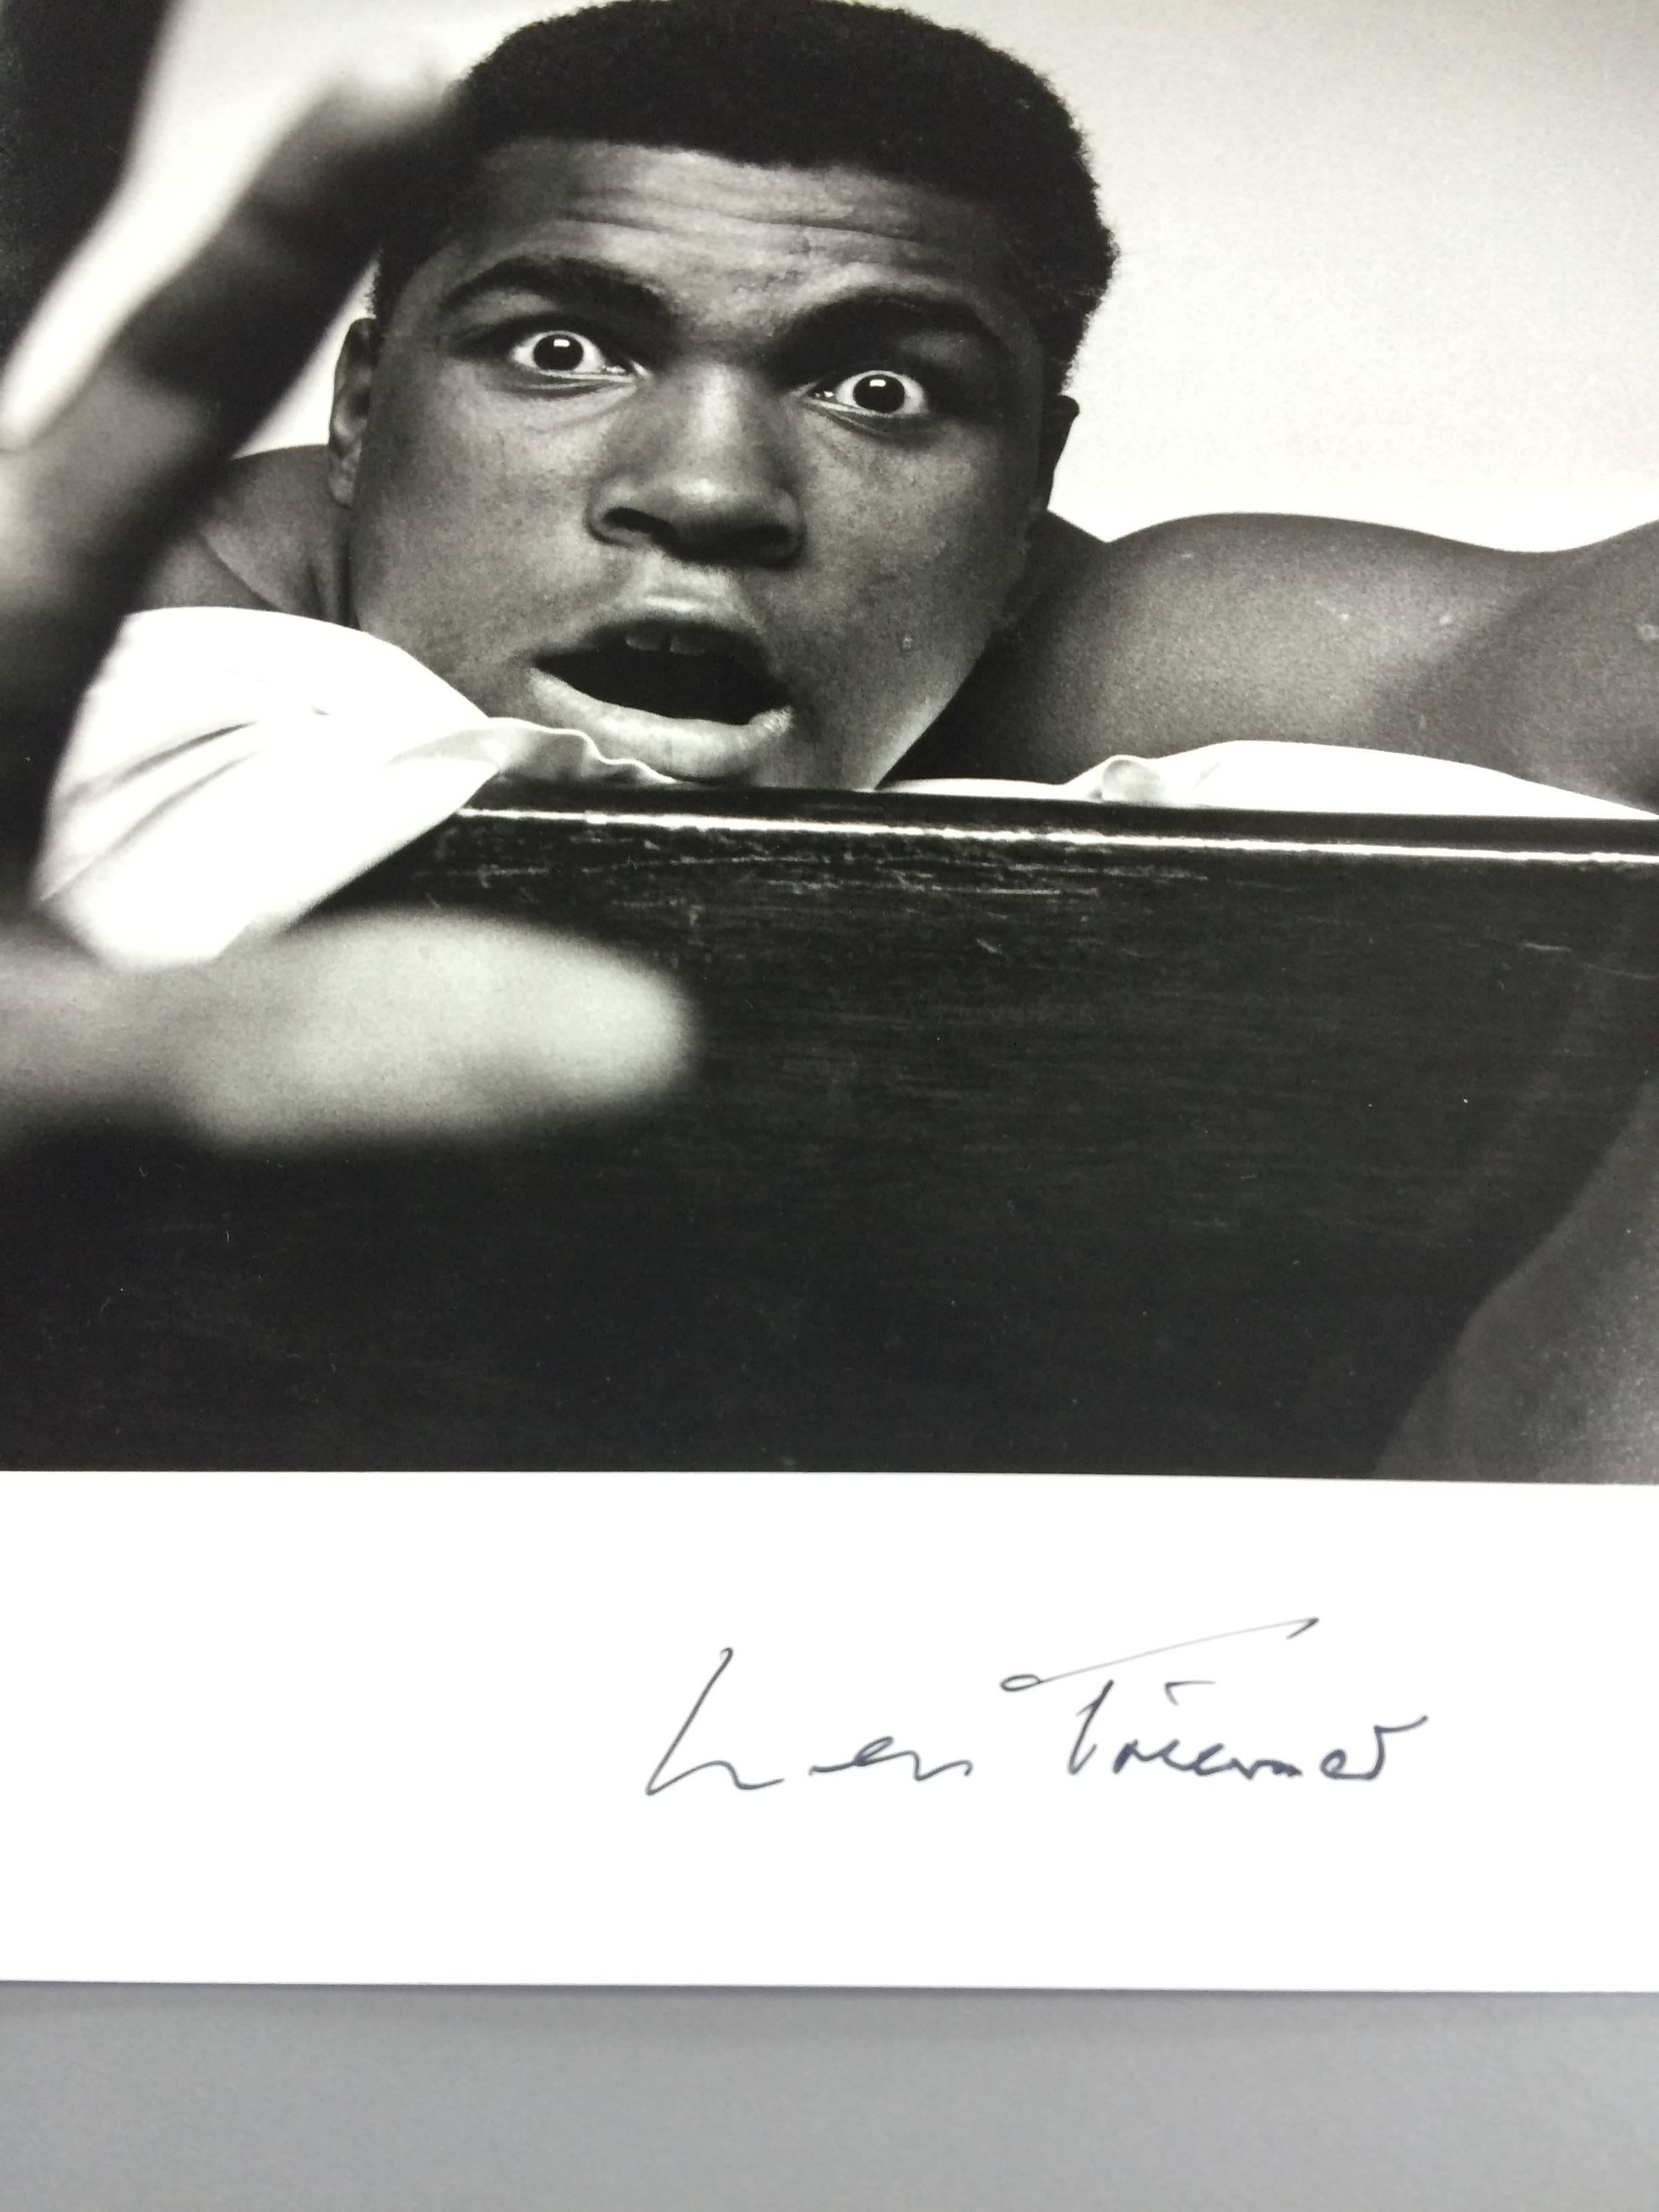 Black and white photograph of American Heavyweight boxer Cassius Clay (later Muhammad Ali) lying on his hotel bed in London in May 1963. He holds up five fingers in a prediction of how many rounds it will take him to knock out British boxer Henry